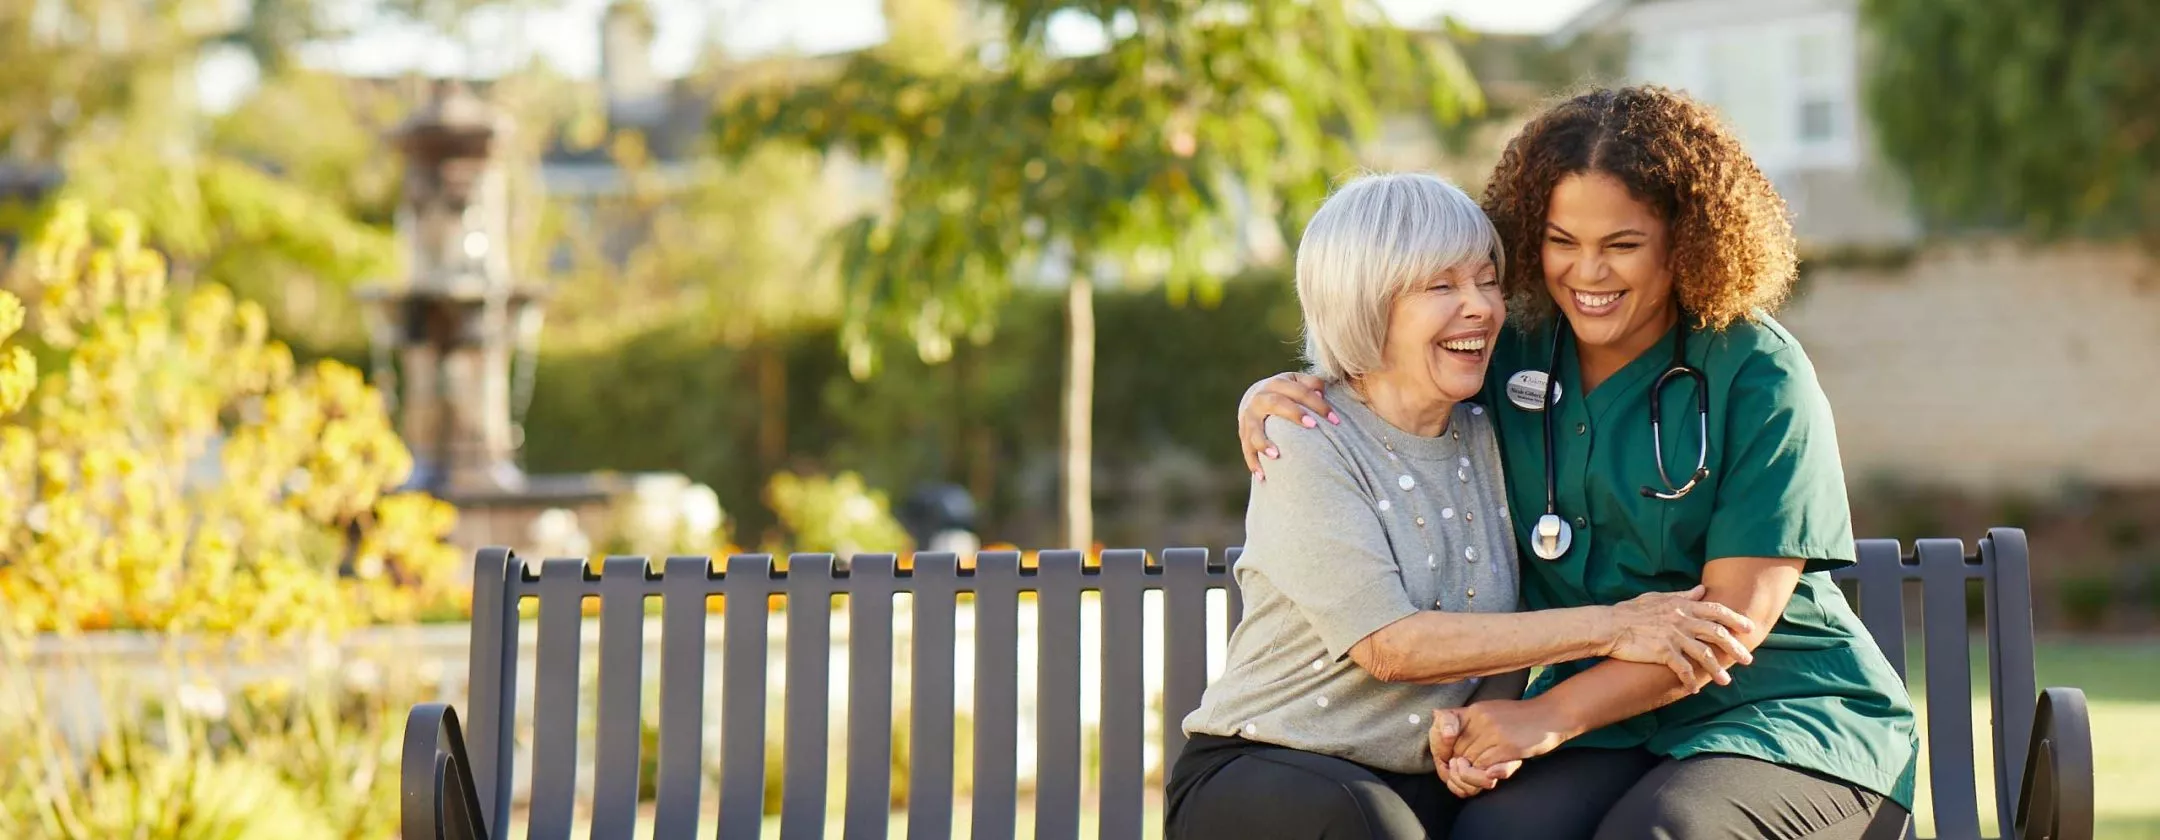 Caregiver is laughing with a senior lady on a bench